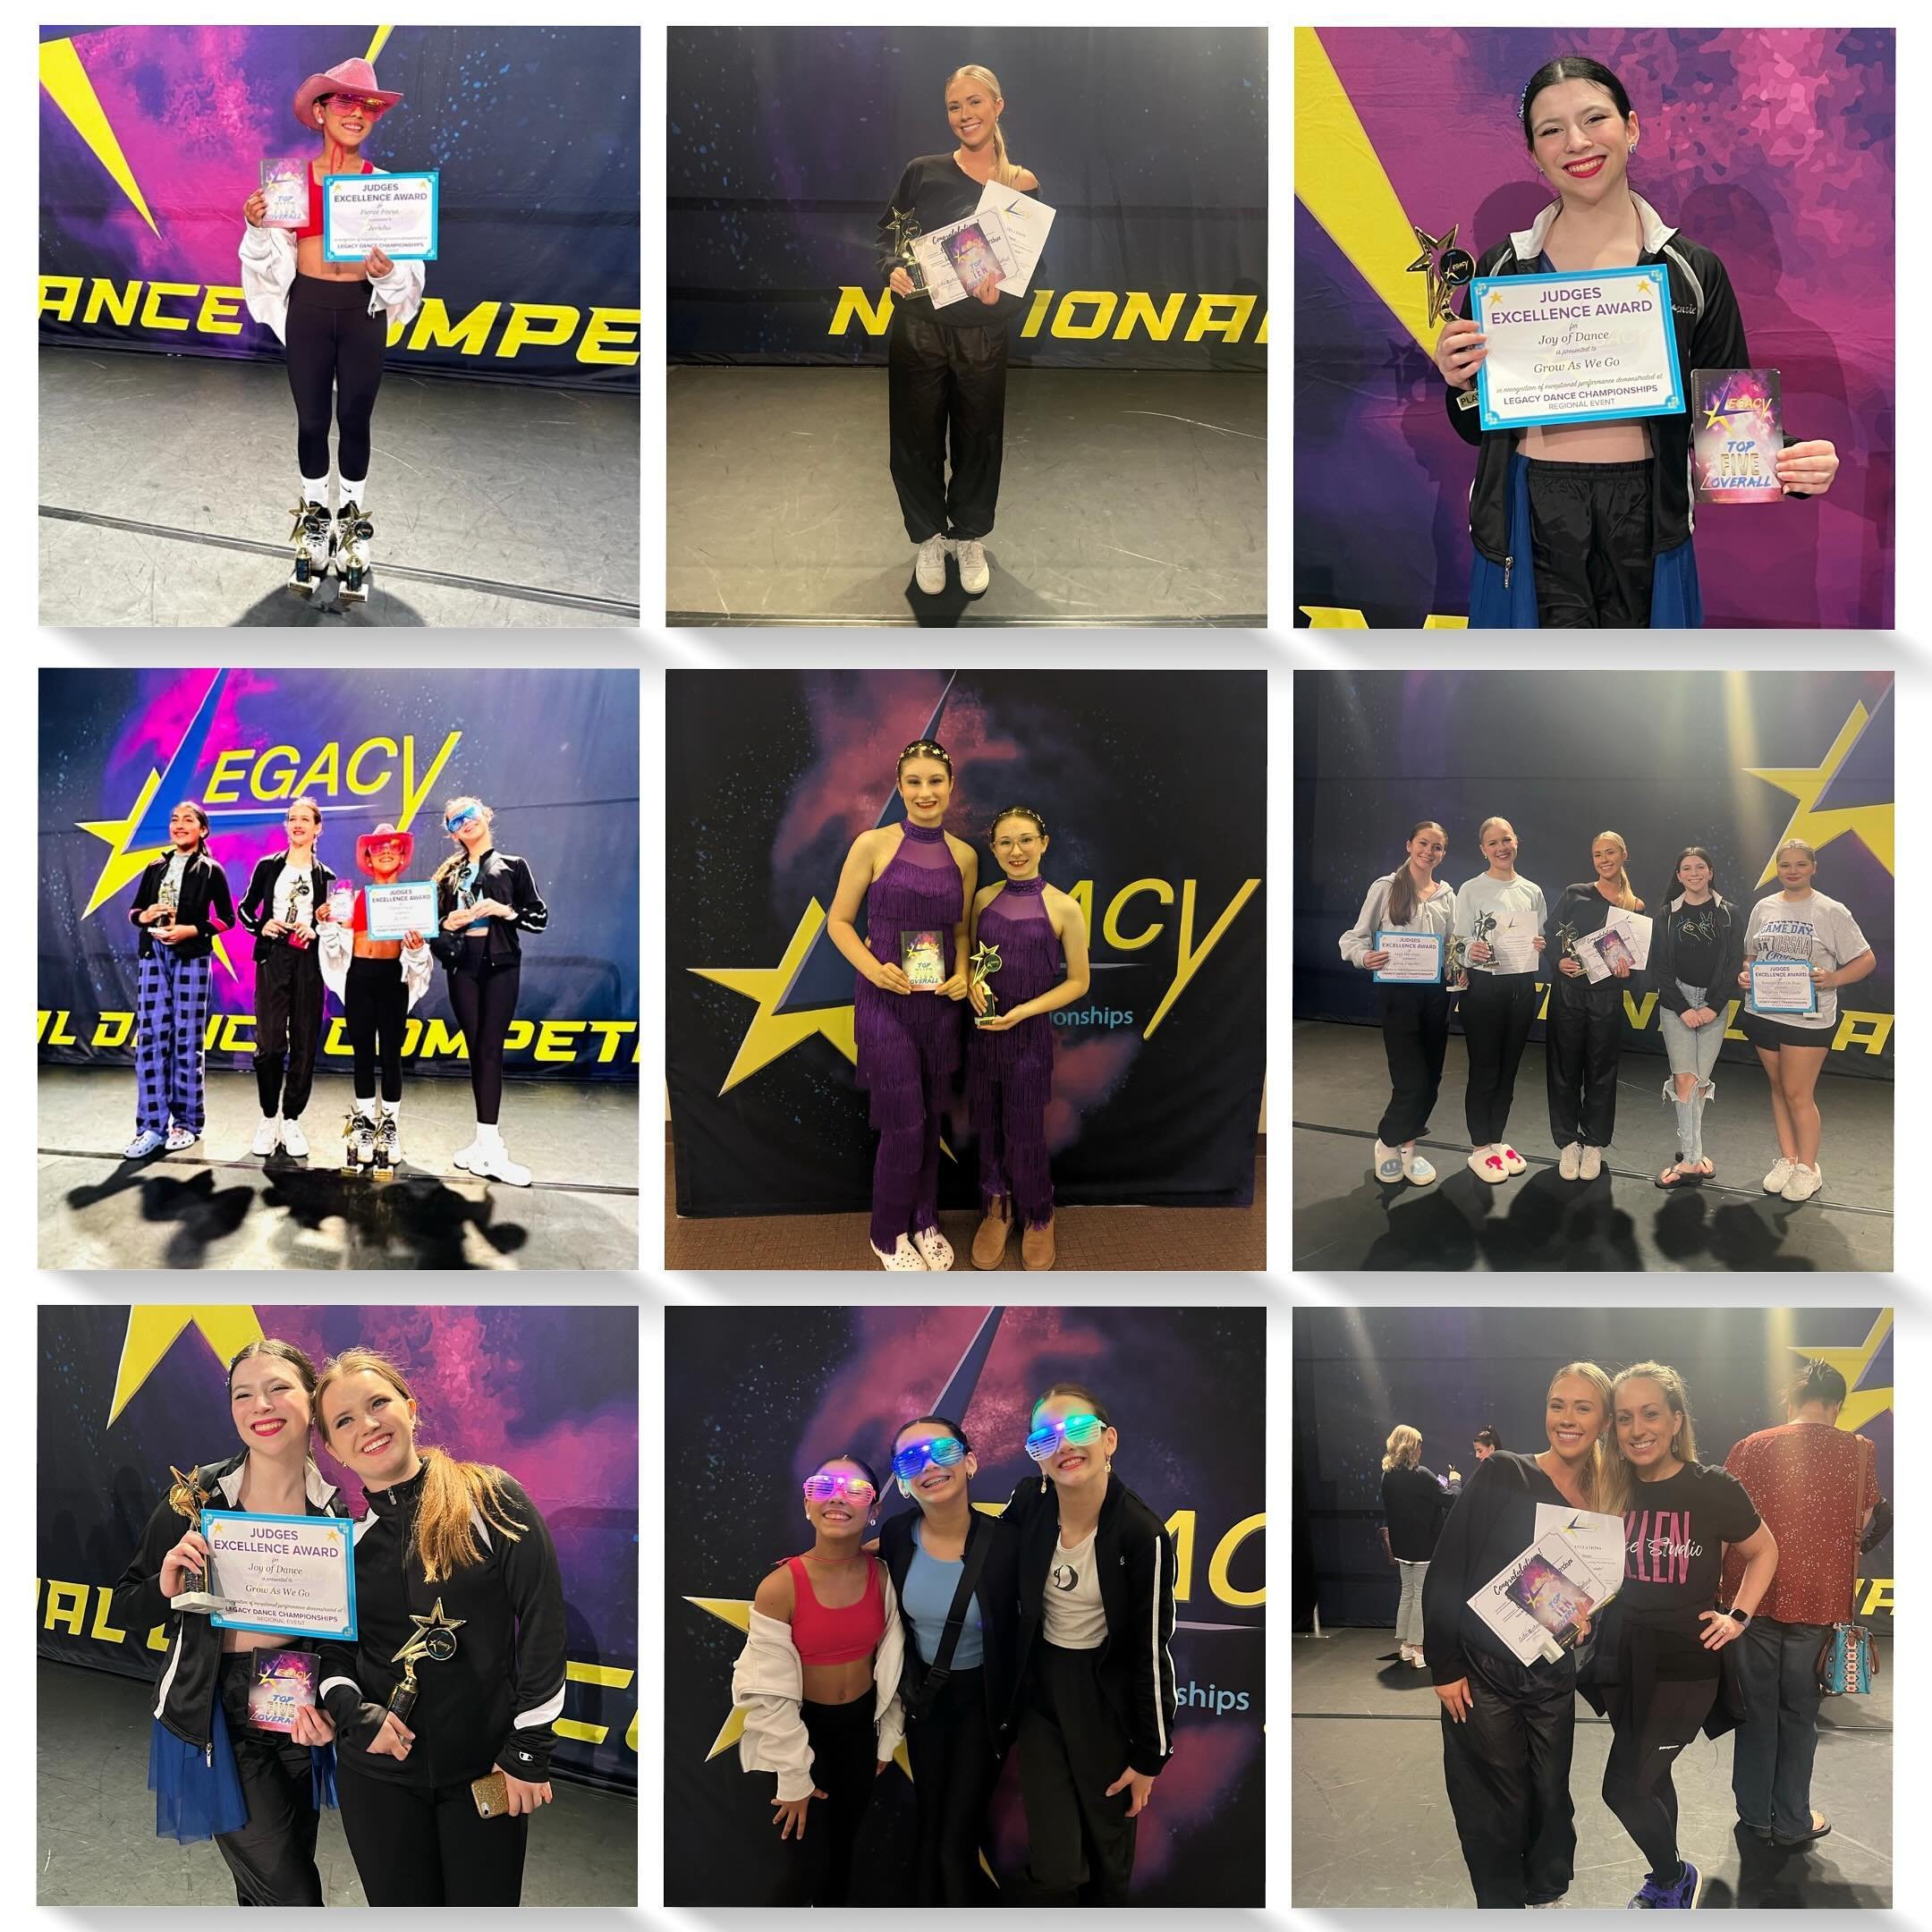 Great weekend @legacydancechampionships for some of our soloists! Way to go, girls! 💜✨

#passionartistrydance #discovertheartistwithin #allendancestudio #mckinneydancestudio #friscodancestudio #thedancestudionetwork